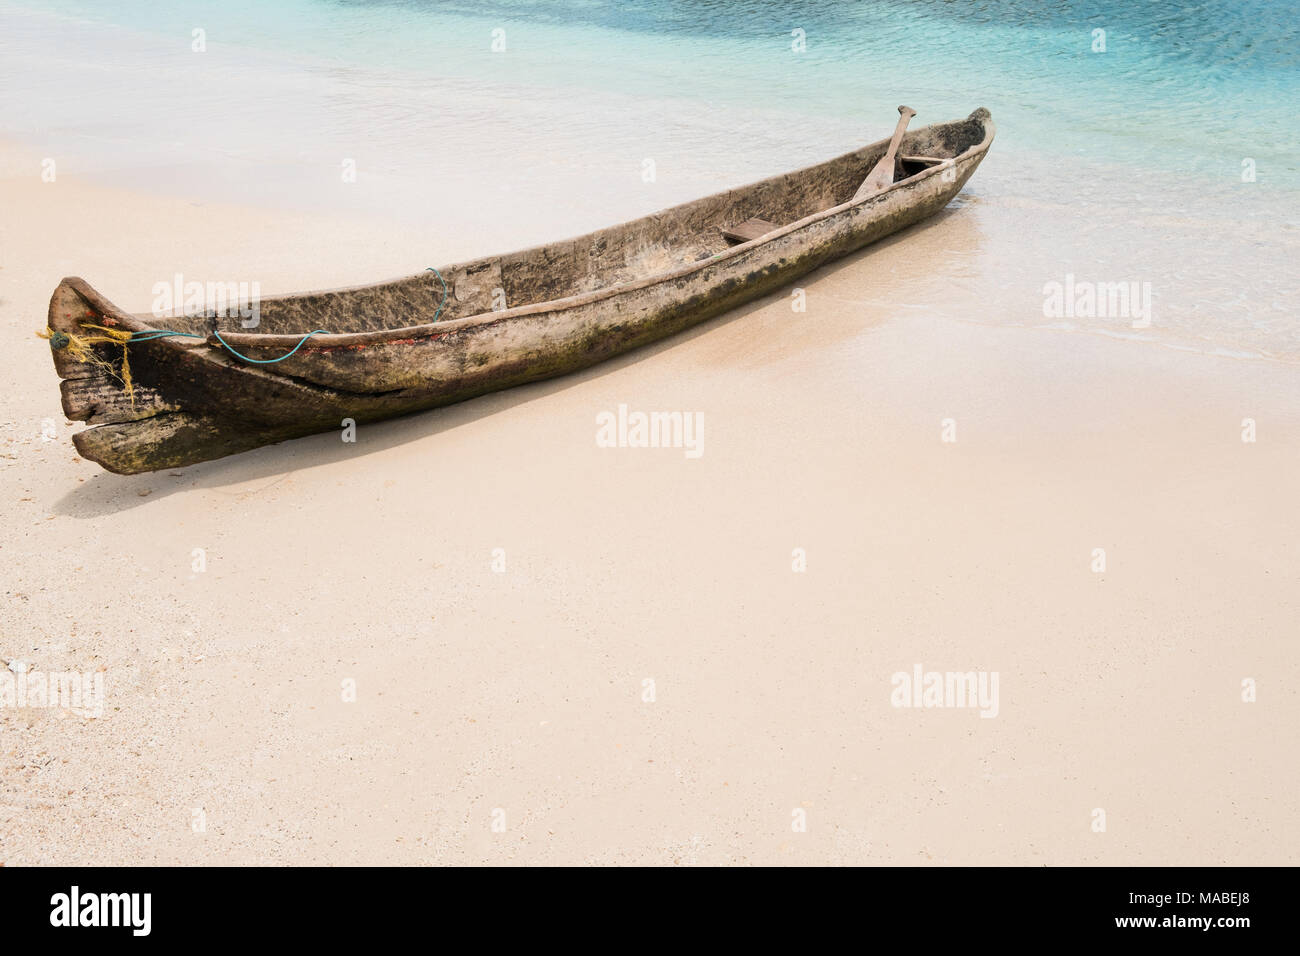 Holz- Boot am Strand, traditionelle Kanu Boot am Strand getrennt. Stockfoto